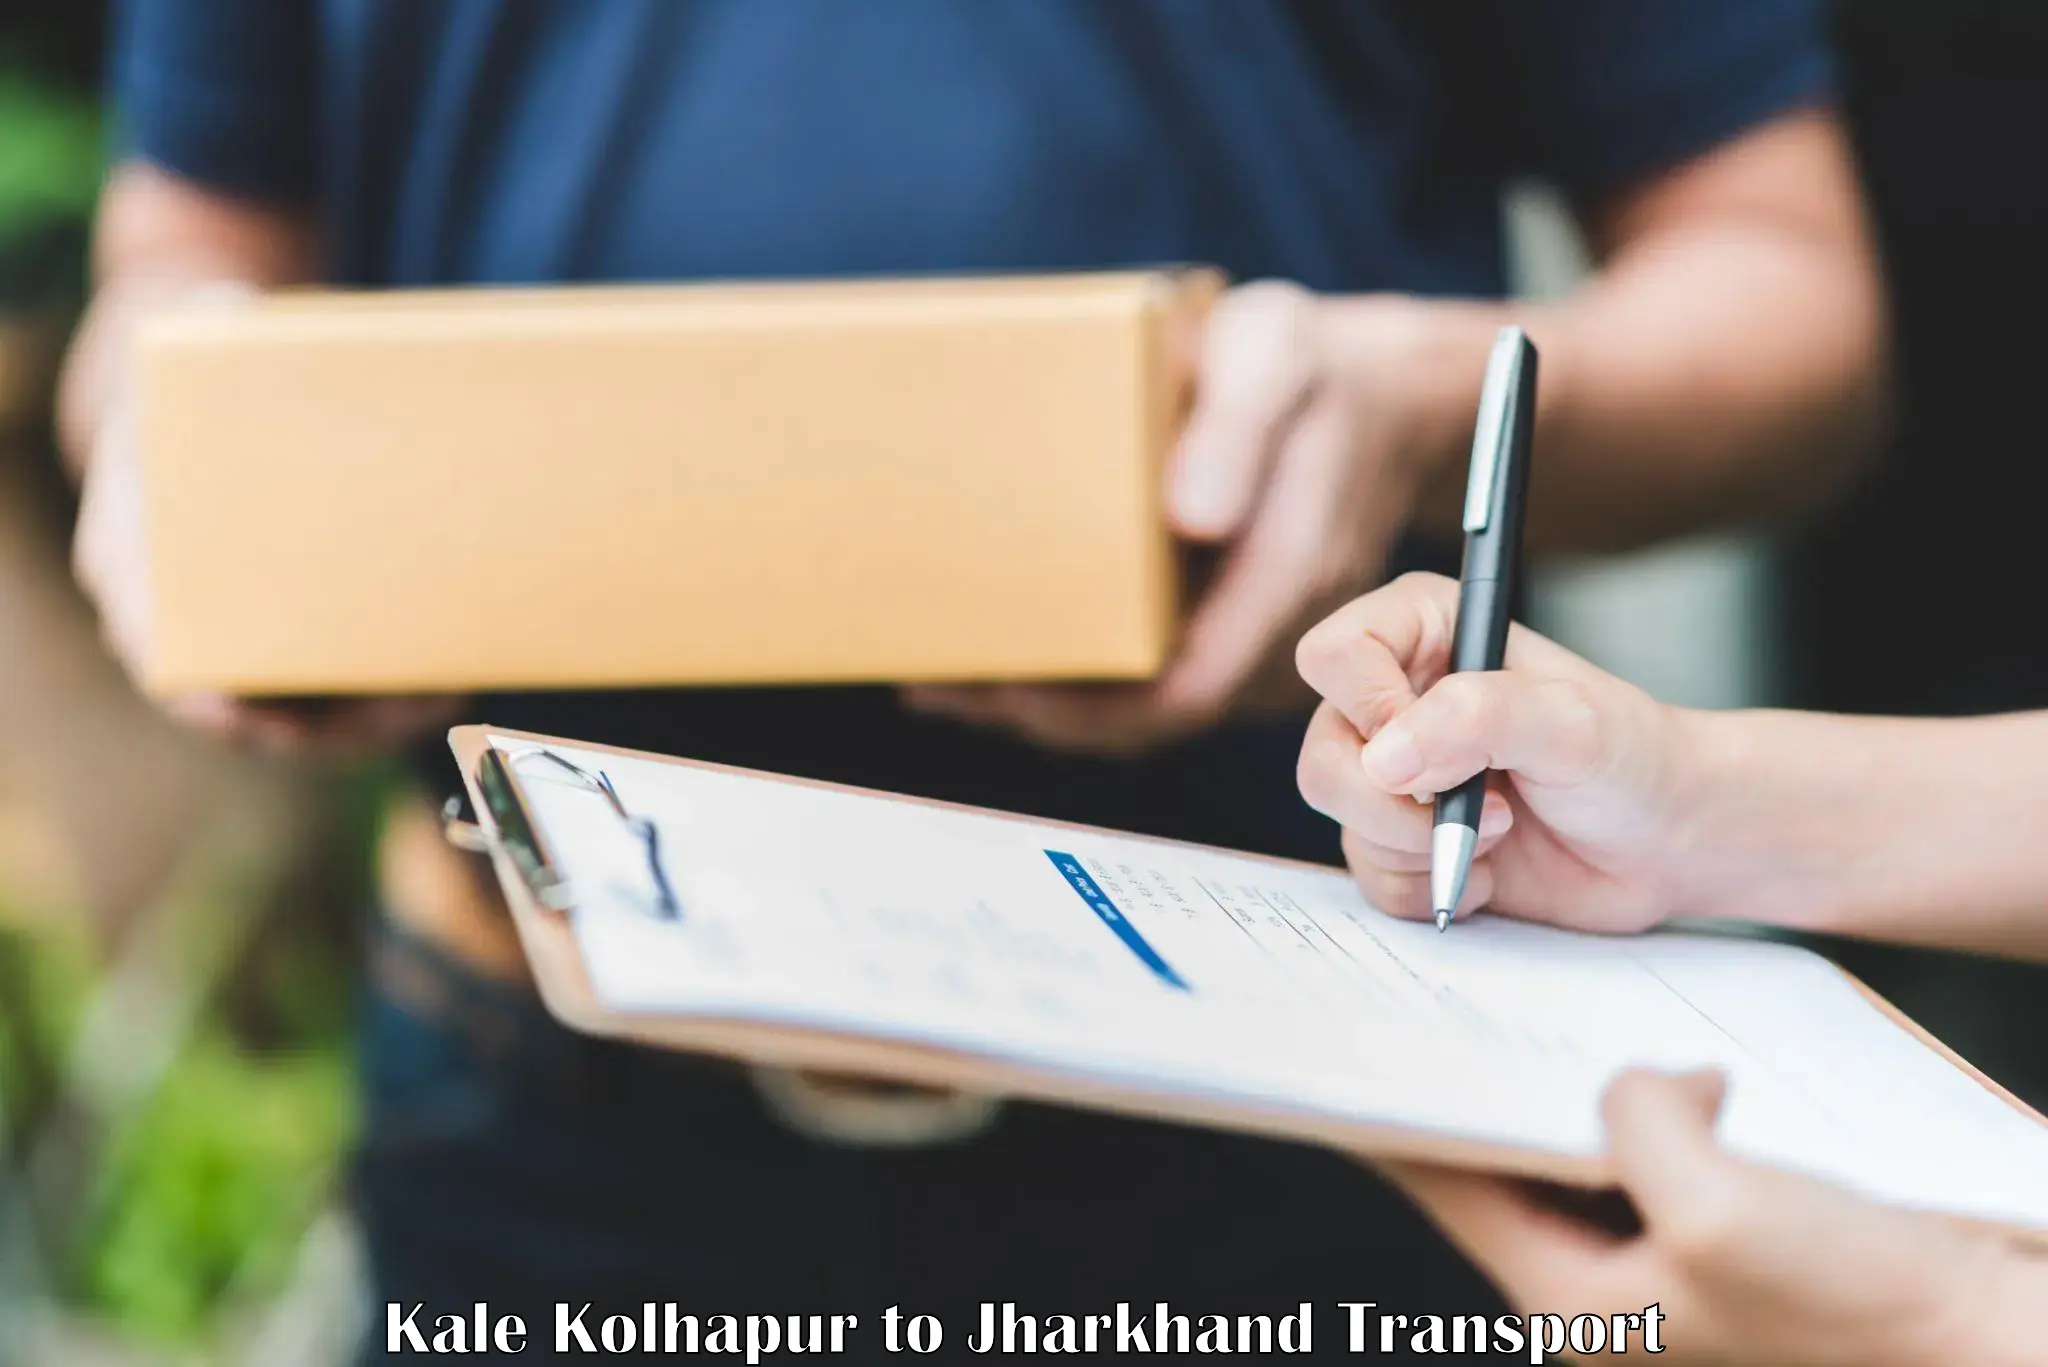 Truck transport companies in India Kale Kolhapur to Jharkhand